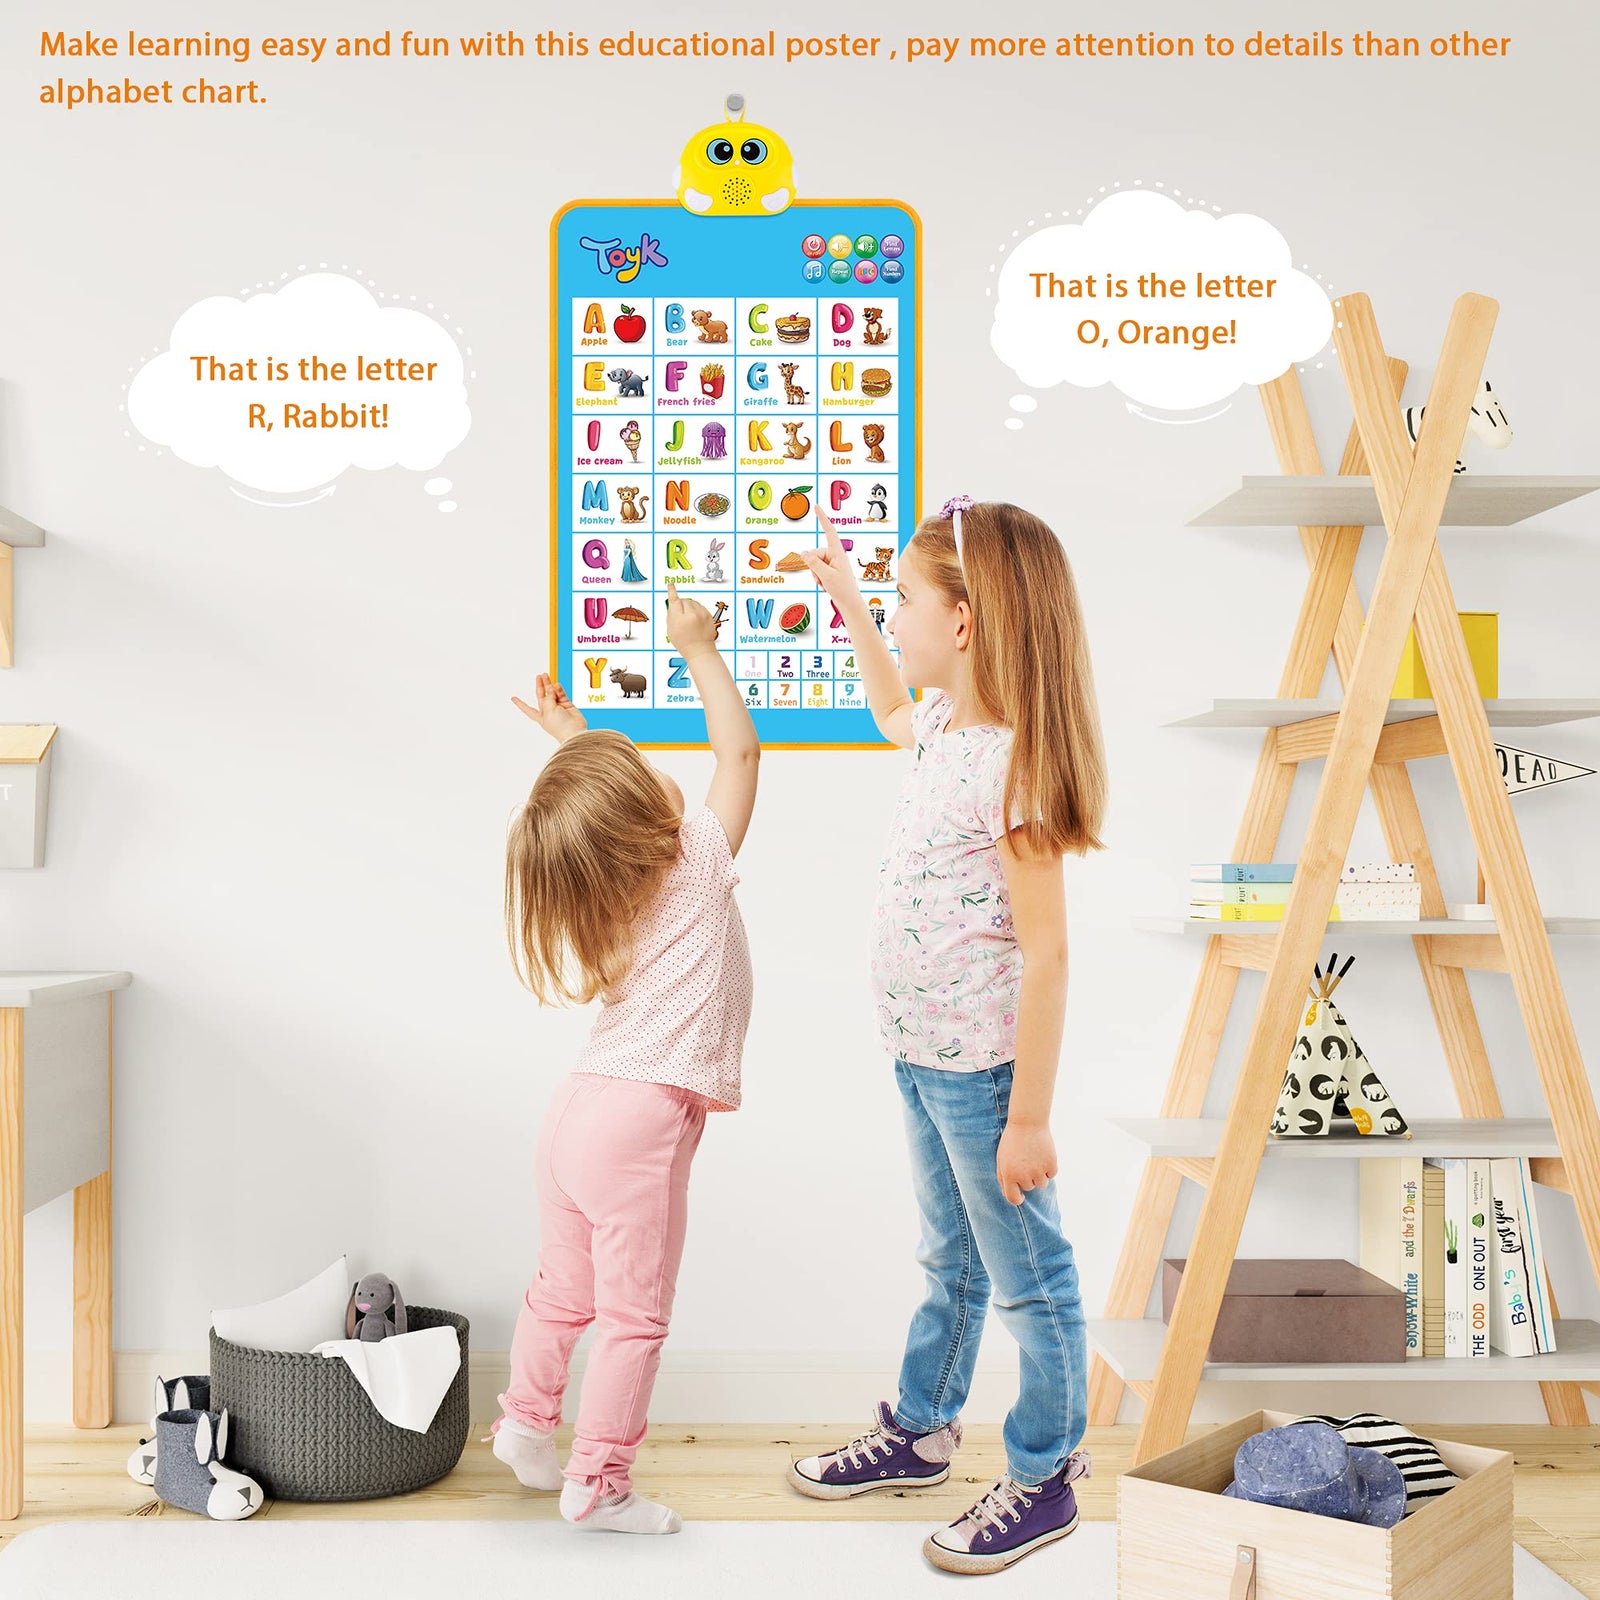 Electronic Alphabet Wall Chart, Talking ABC, 123s, Music Poster, Interactive Educational Toddler Toy, Gifts for Age 1 2 3 4 5 Year Old Boys Girls, Kids Fun Learning at Daycare, Preschool, Kindergarten